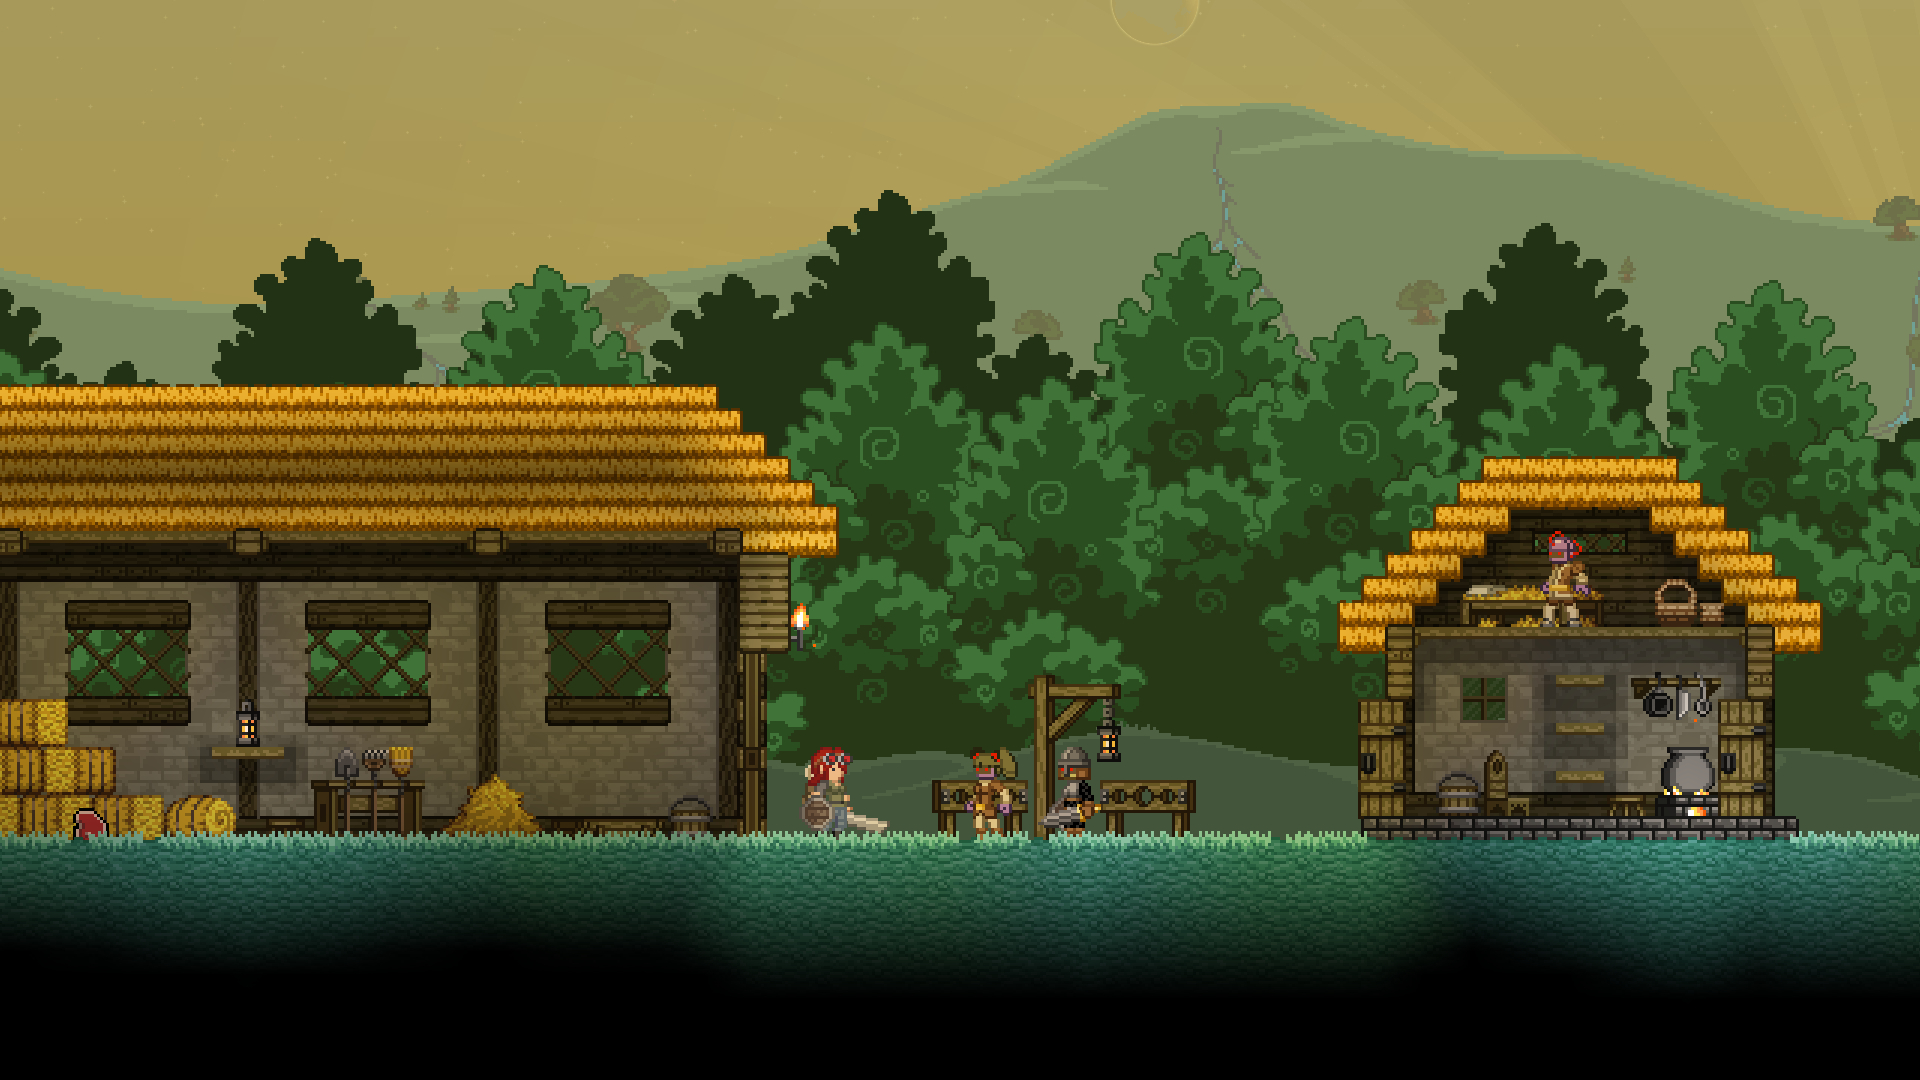 1920x1080 Starbound Finally Coming Out Of Early Access After Five Years; Full Release On July 22 Gameranx